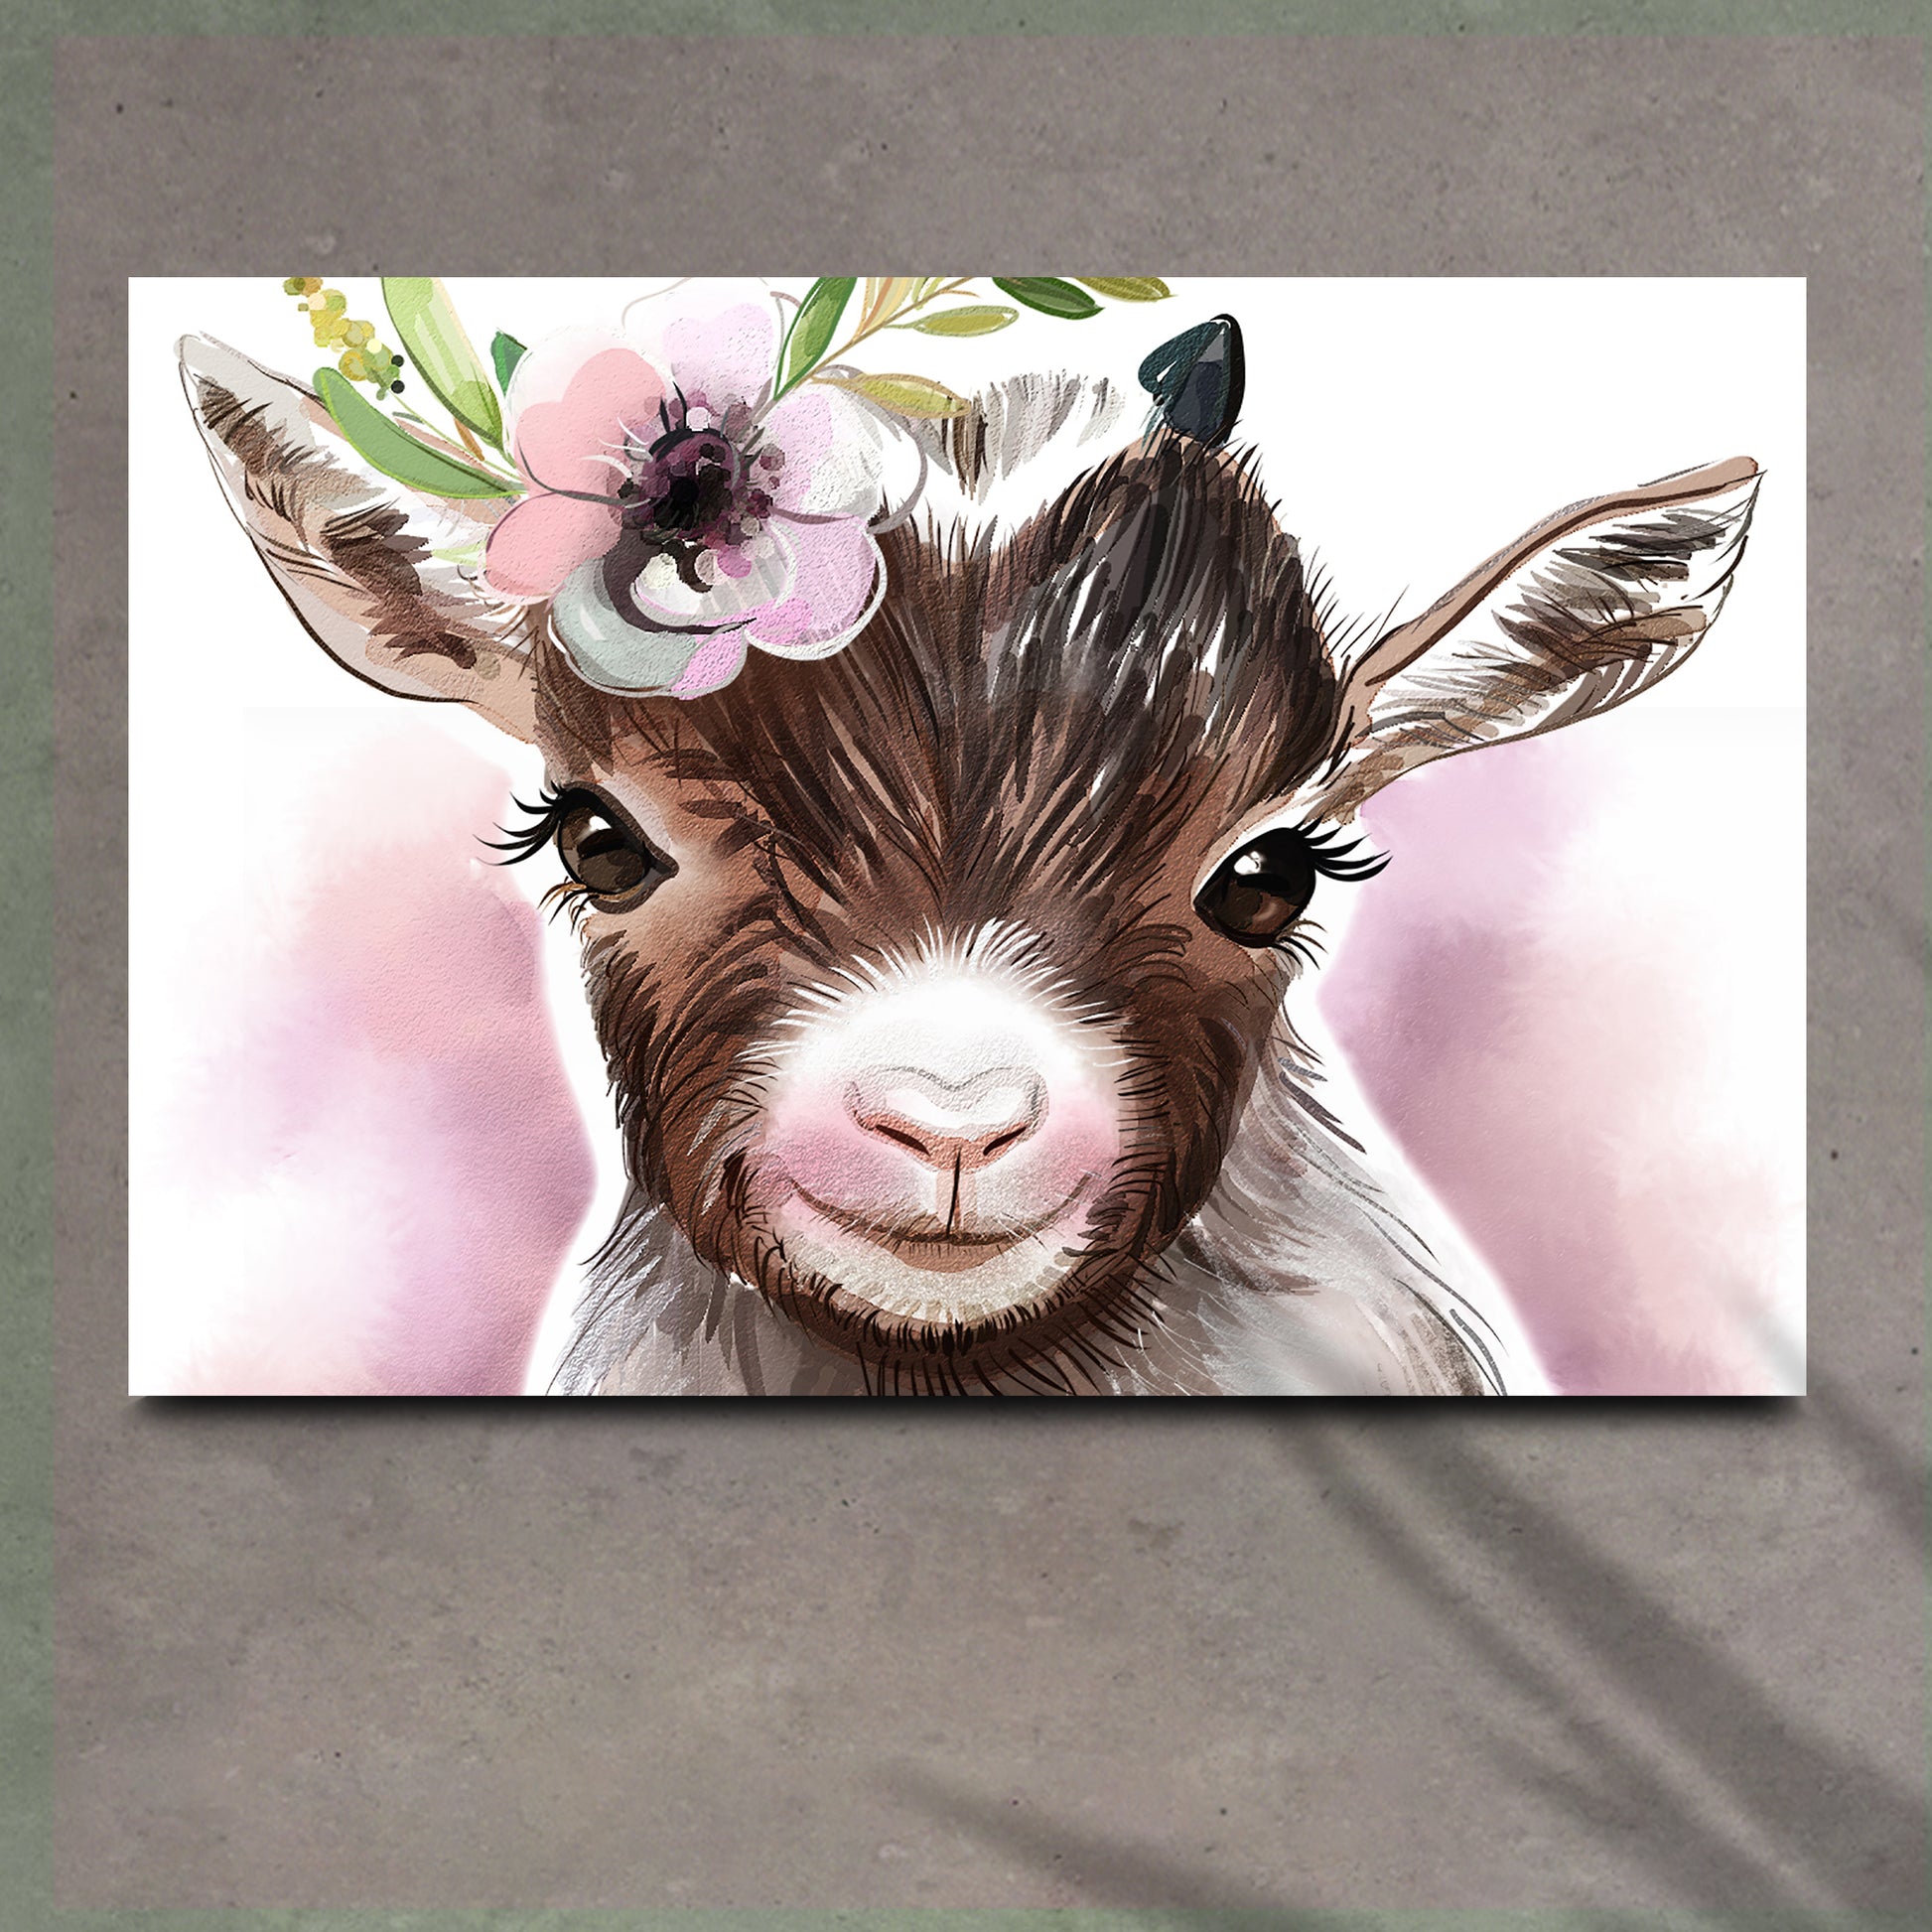 Flower Crown Baby Goat Canvas Wall Art - Image by Tailored Canvases